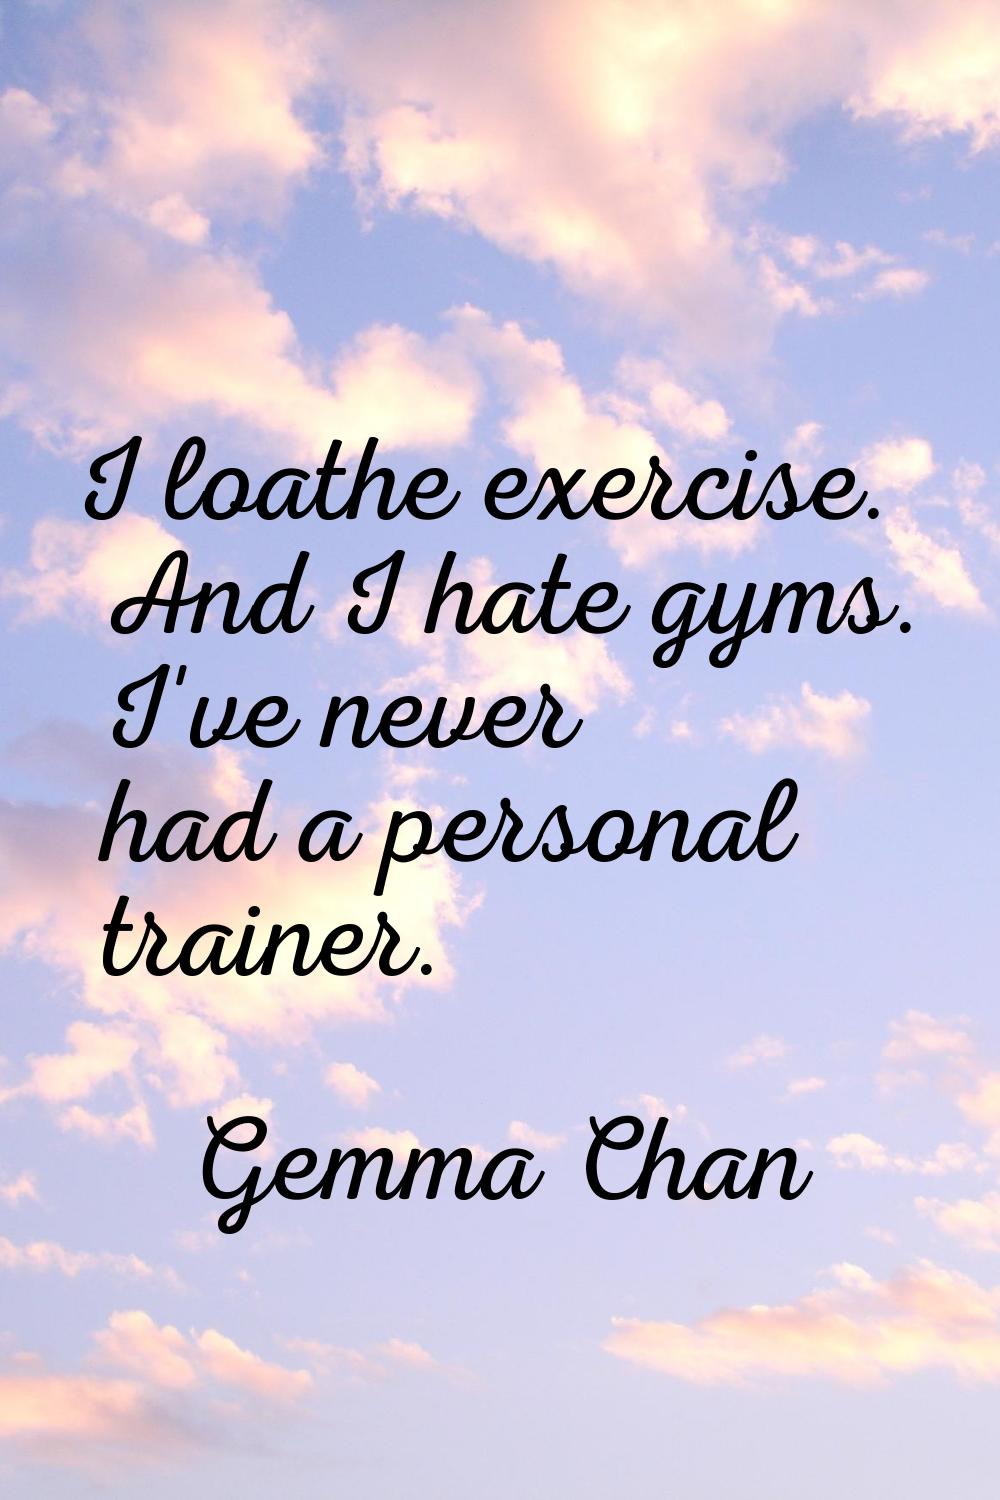 I loathe exercise. And I hate gyms. I've never had a personal trainer.